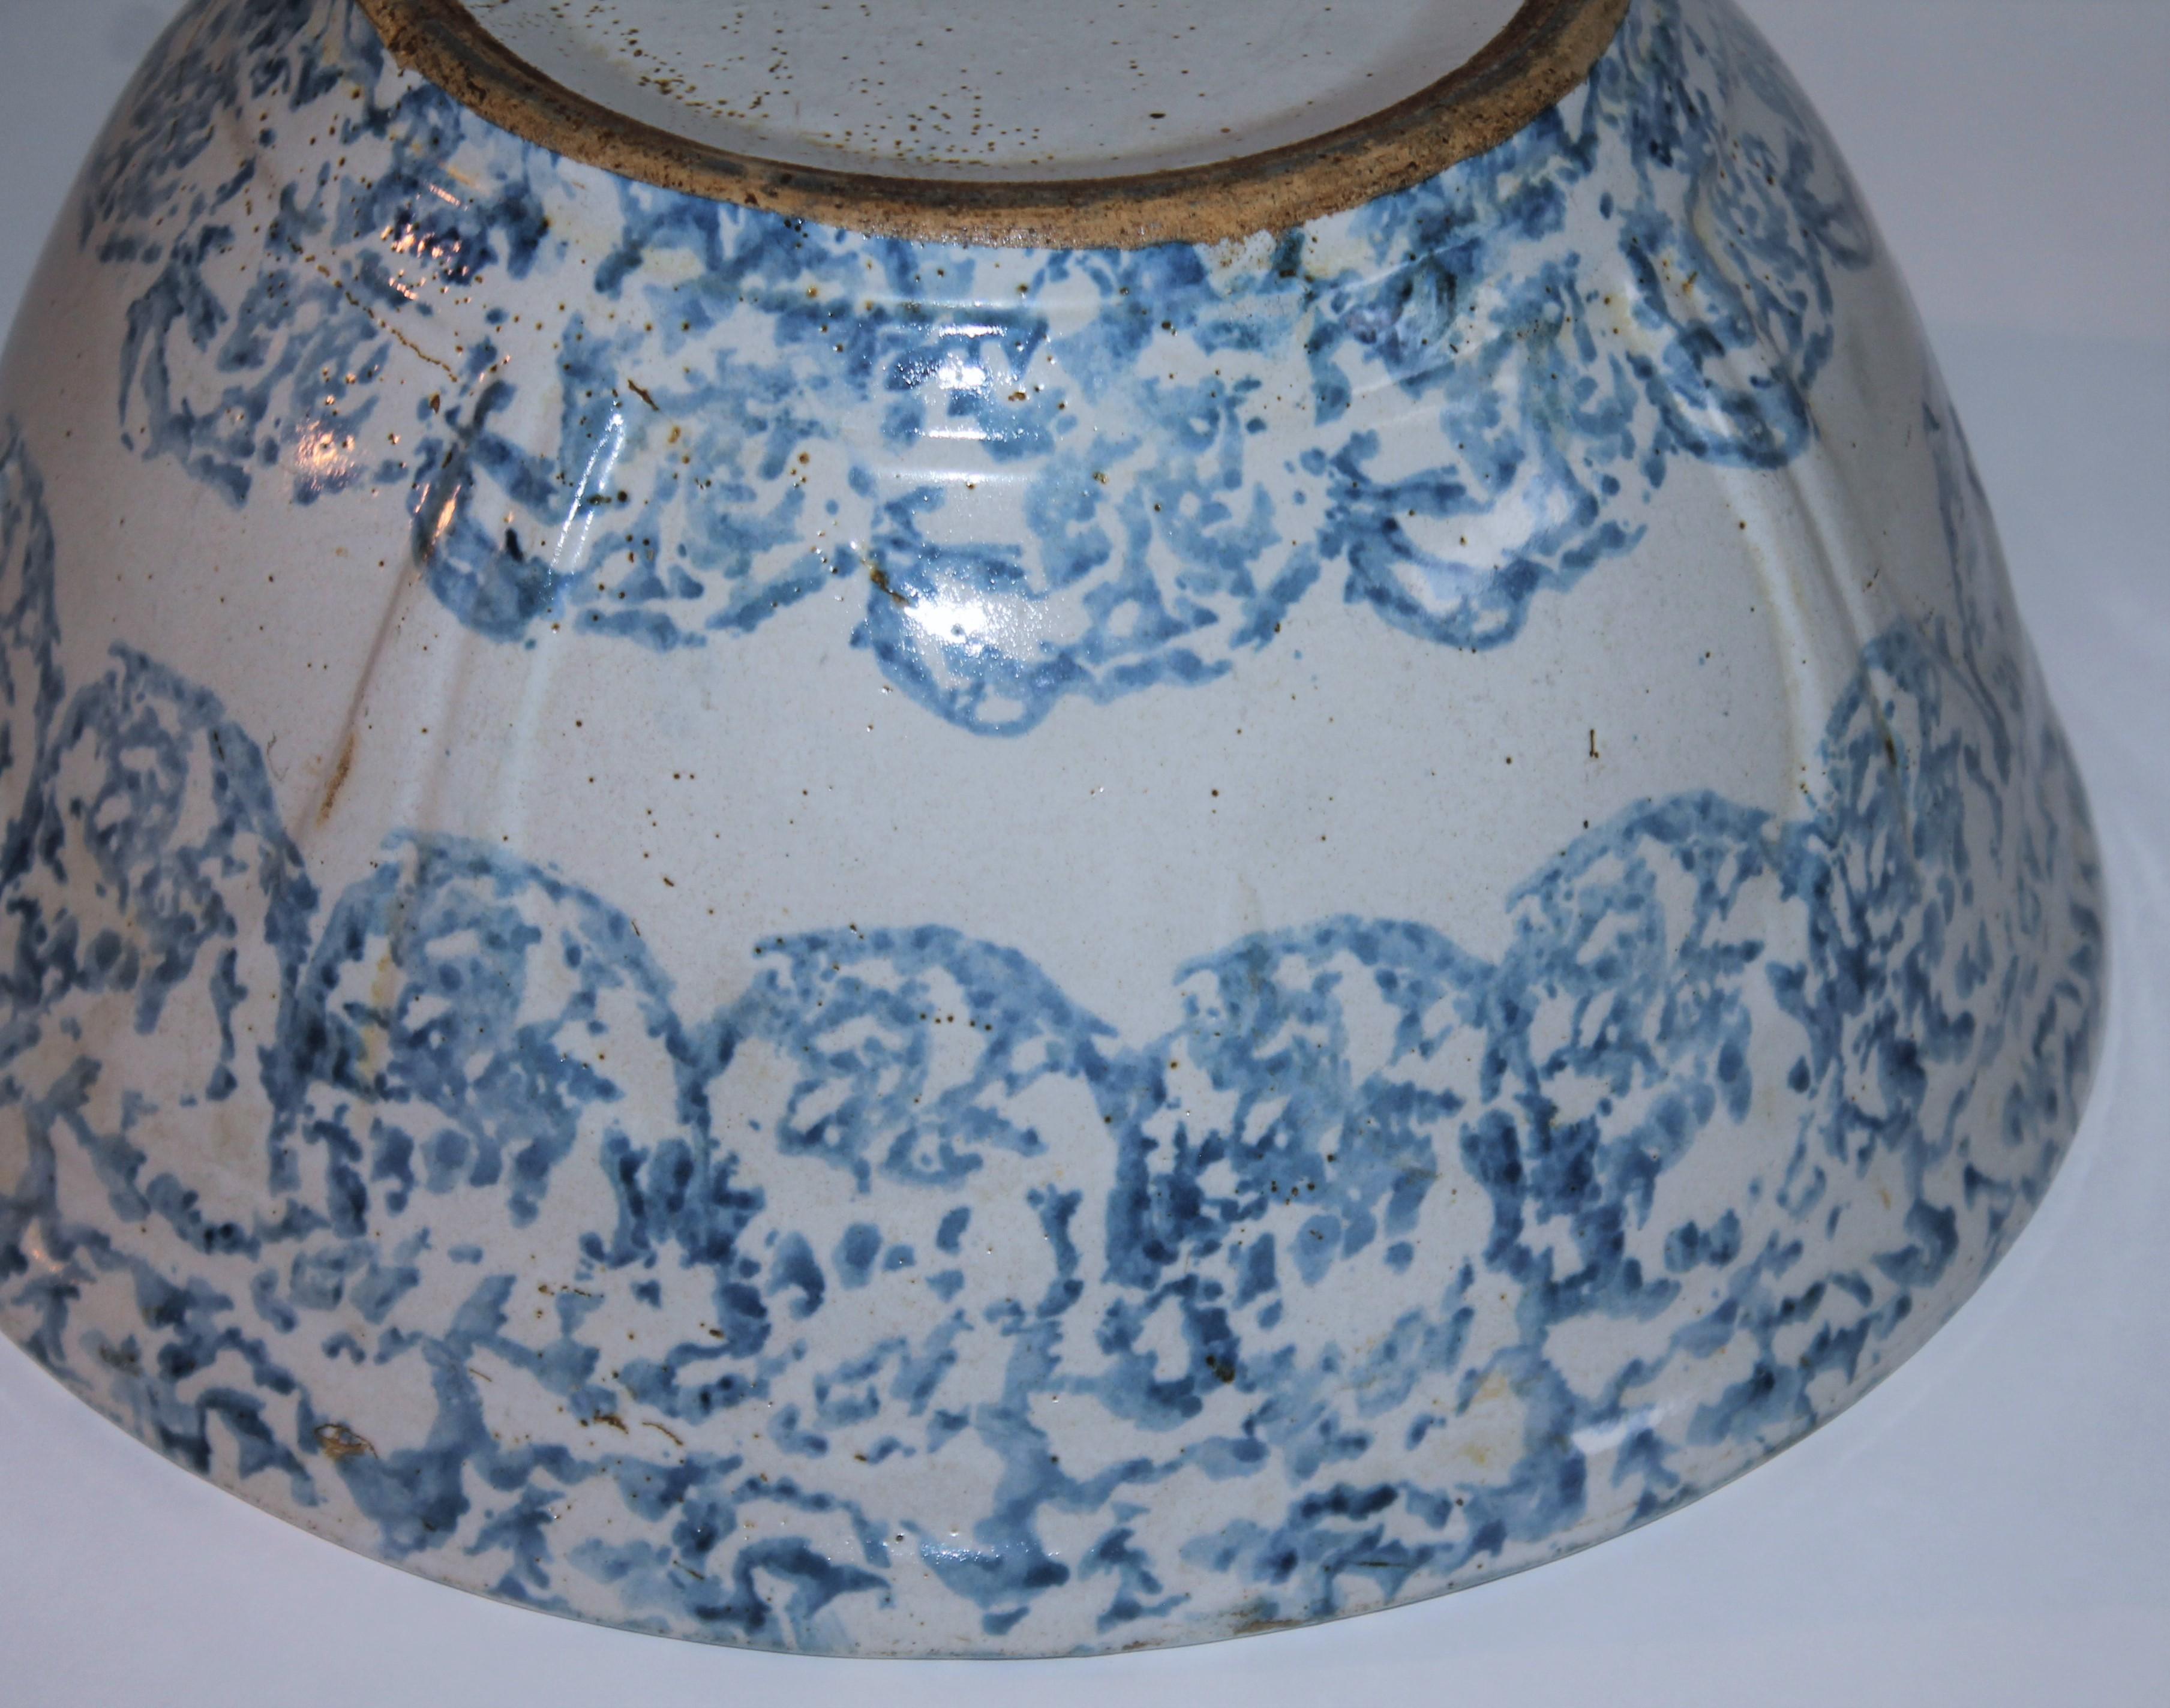 Hand-Painted 19thc Sponge Ware Mixing Bowl For Sale